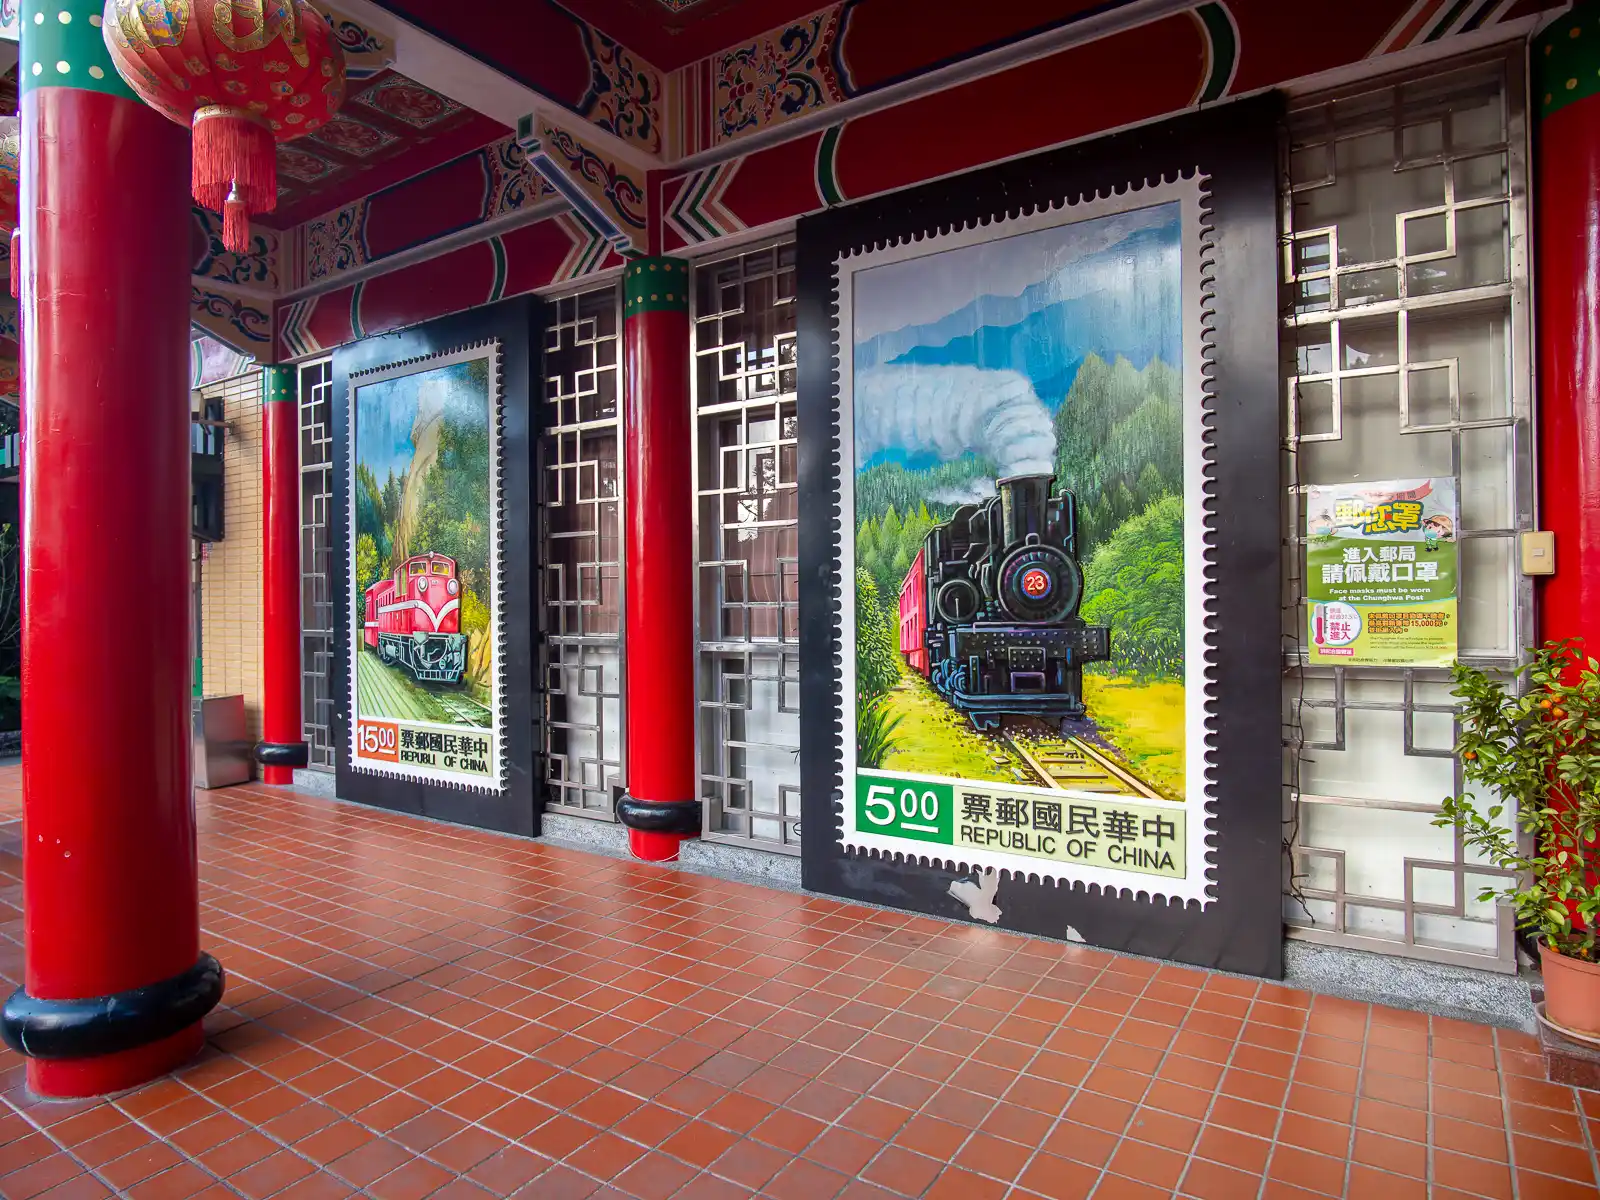 A colorful mural depicting a stamp celebrating the Alishan Forest Railway is visible on the wall of the Alishan Post Office.